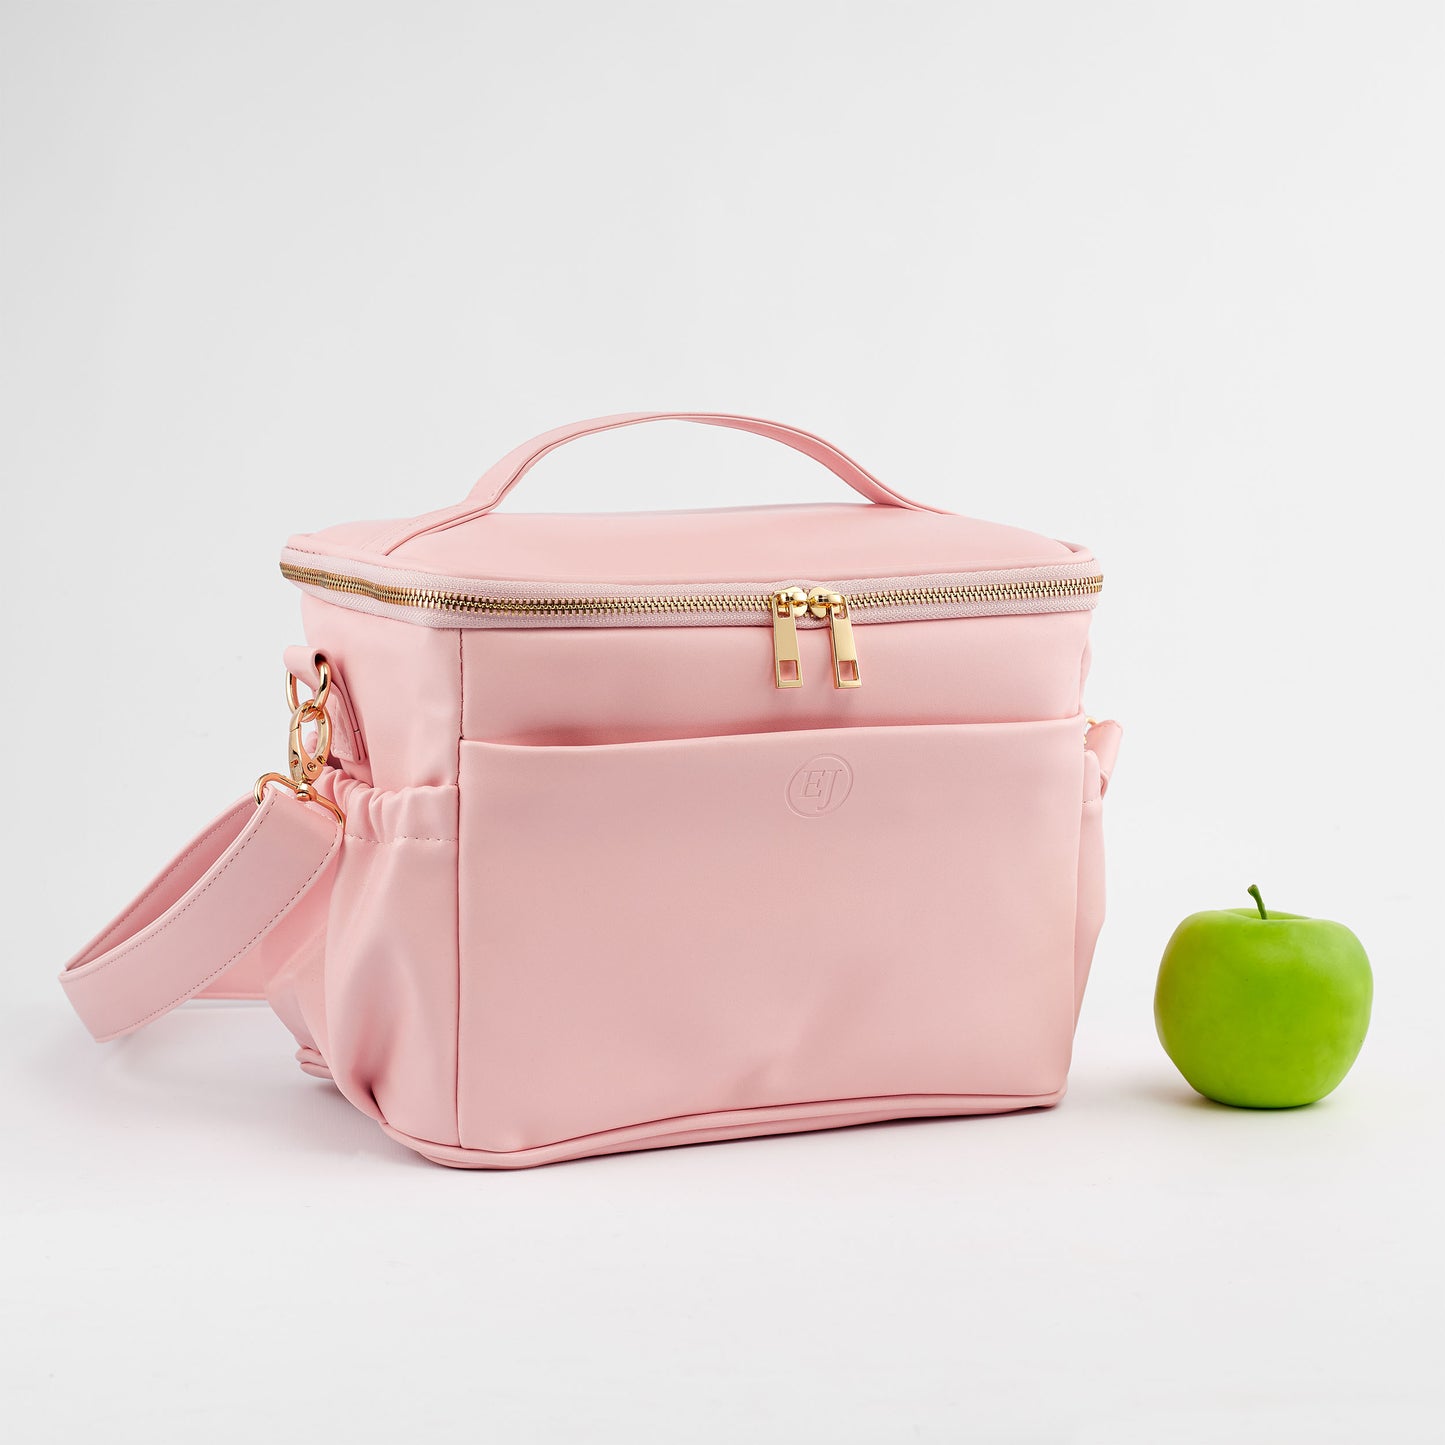 Premium Insulated Lunch Bag, Cruelty-Free and Waterproof Faux Leather - Blush Beige